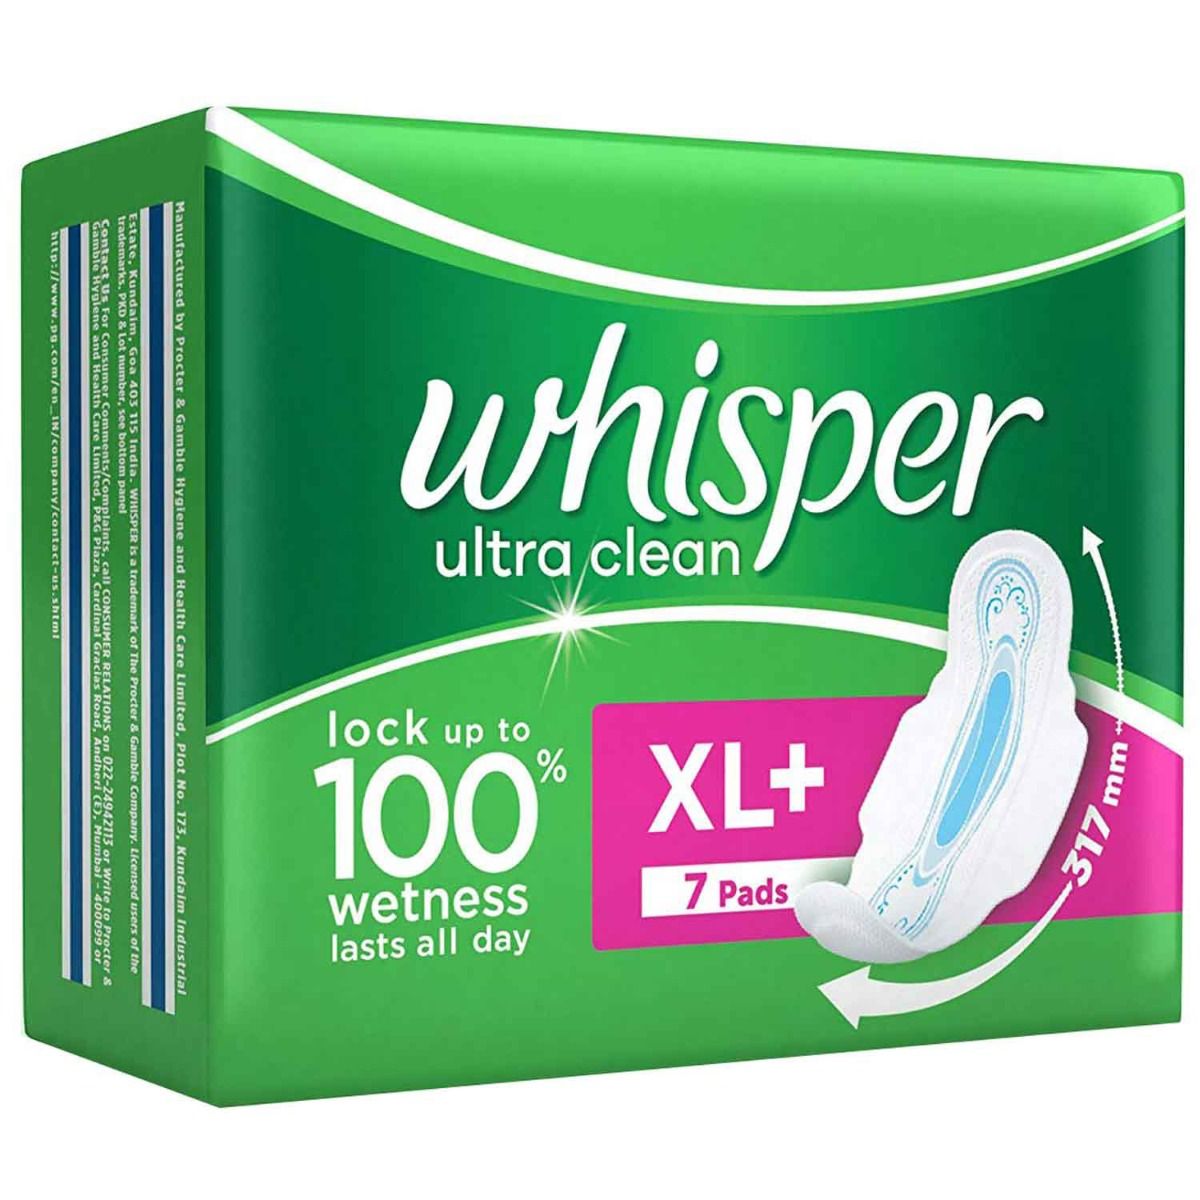 Whisper Ultra Clean Wings Sanitary Pads XL+, 7 Count, Pack of 1 